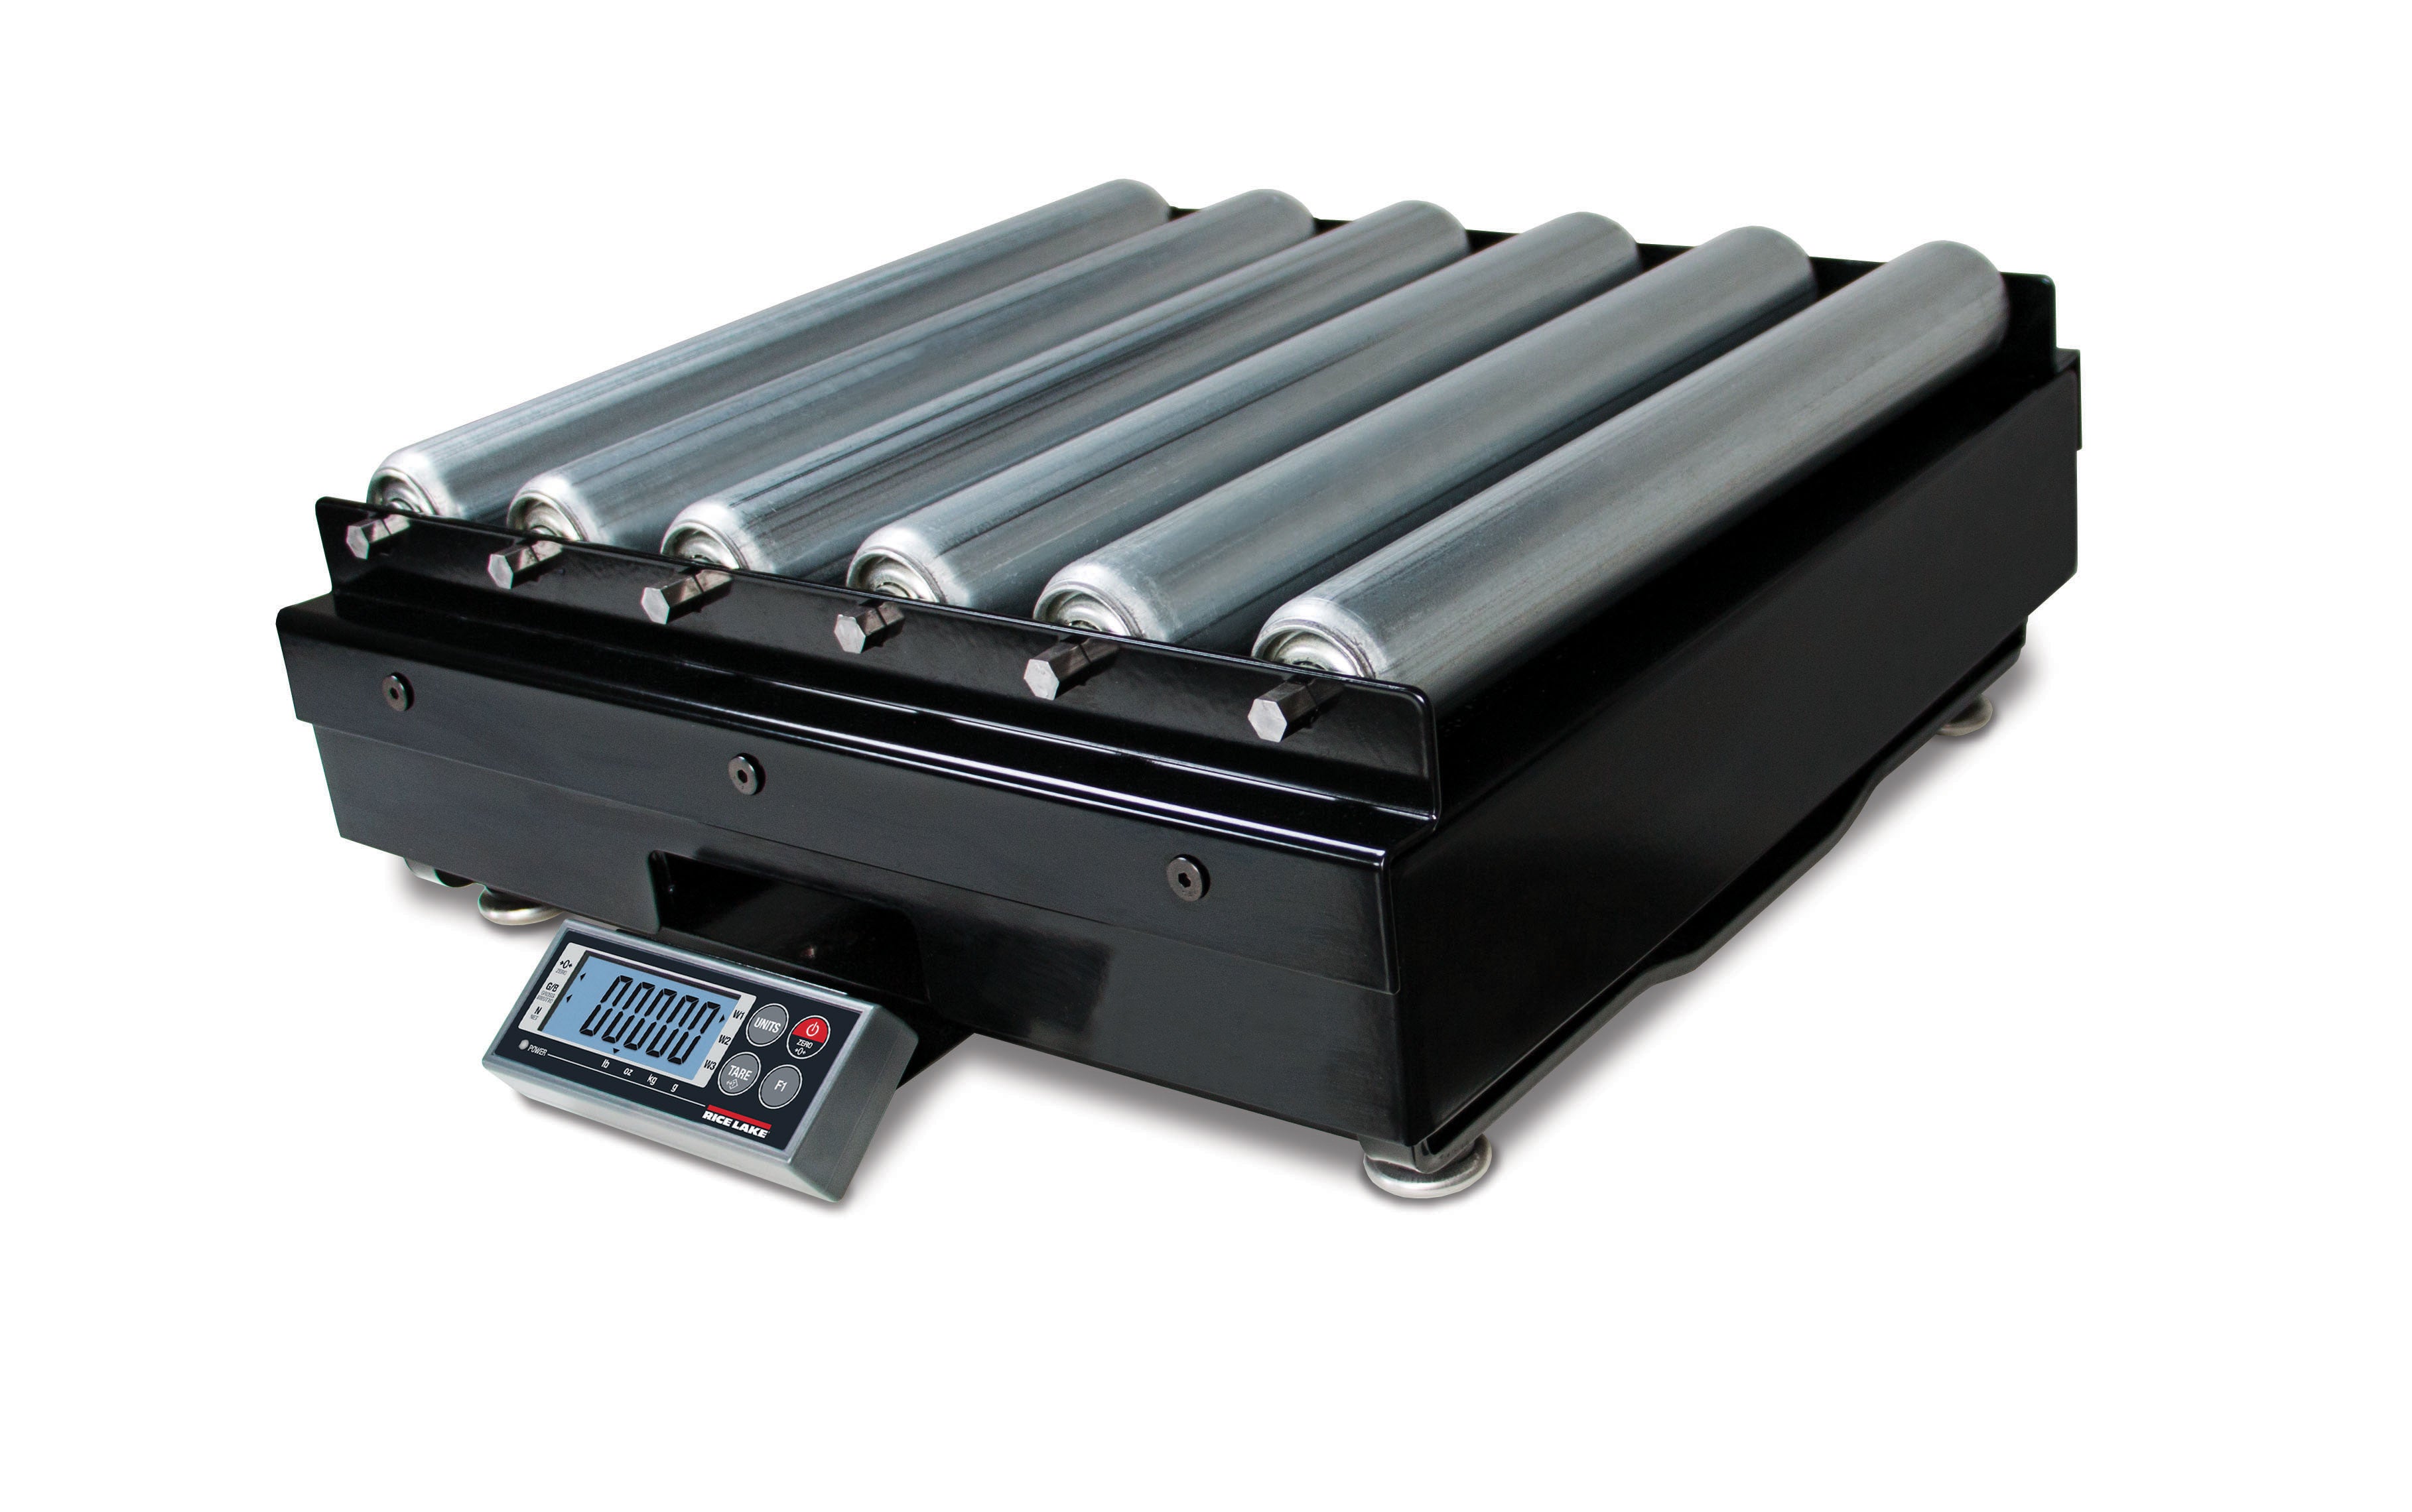 Rice Lake 182398 300 x 0.1 lb/150 x 0.05kg, BP 2020-150S Shipping Digital Scale, Roller Conveyor Top with 2 years Warranty